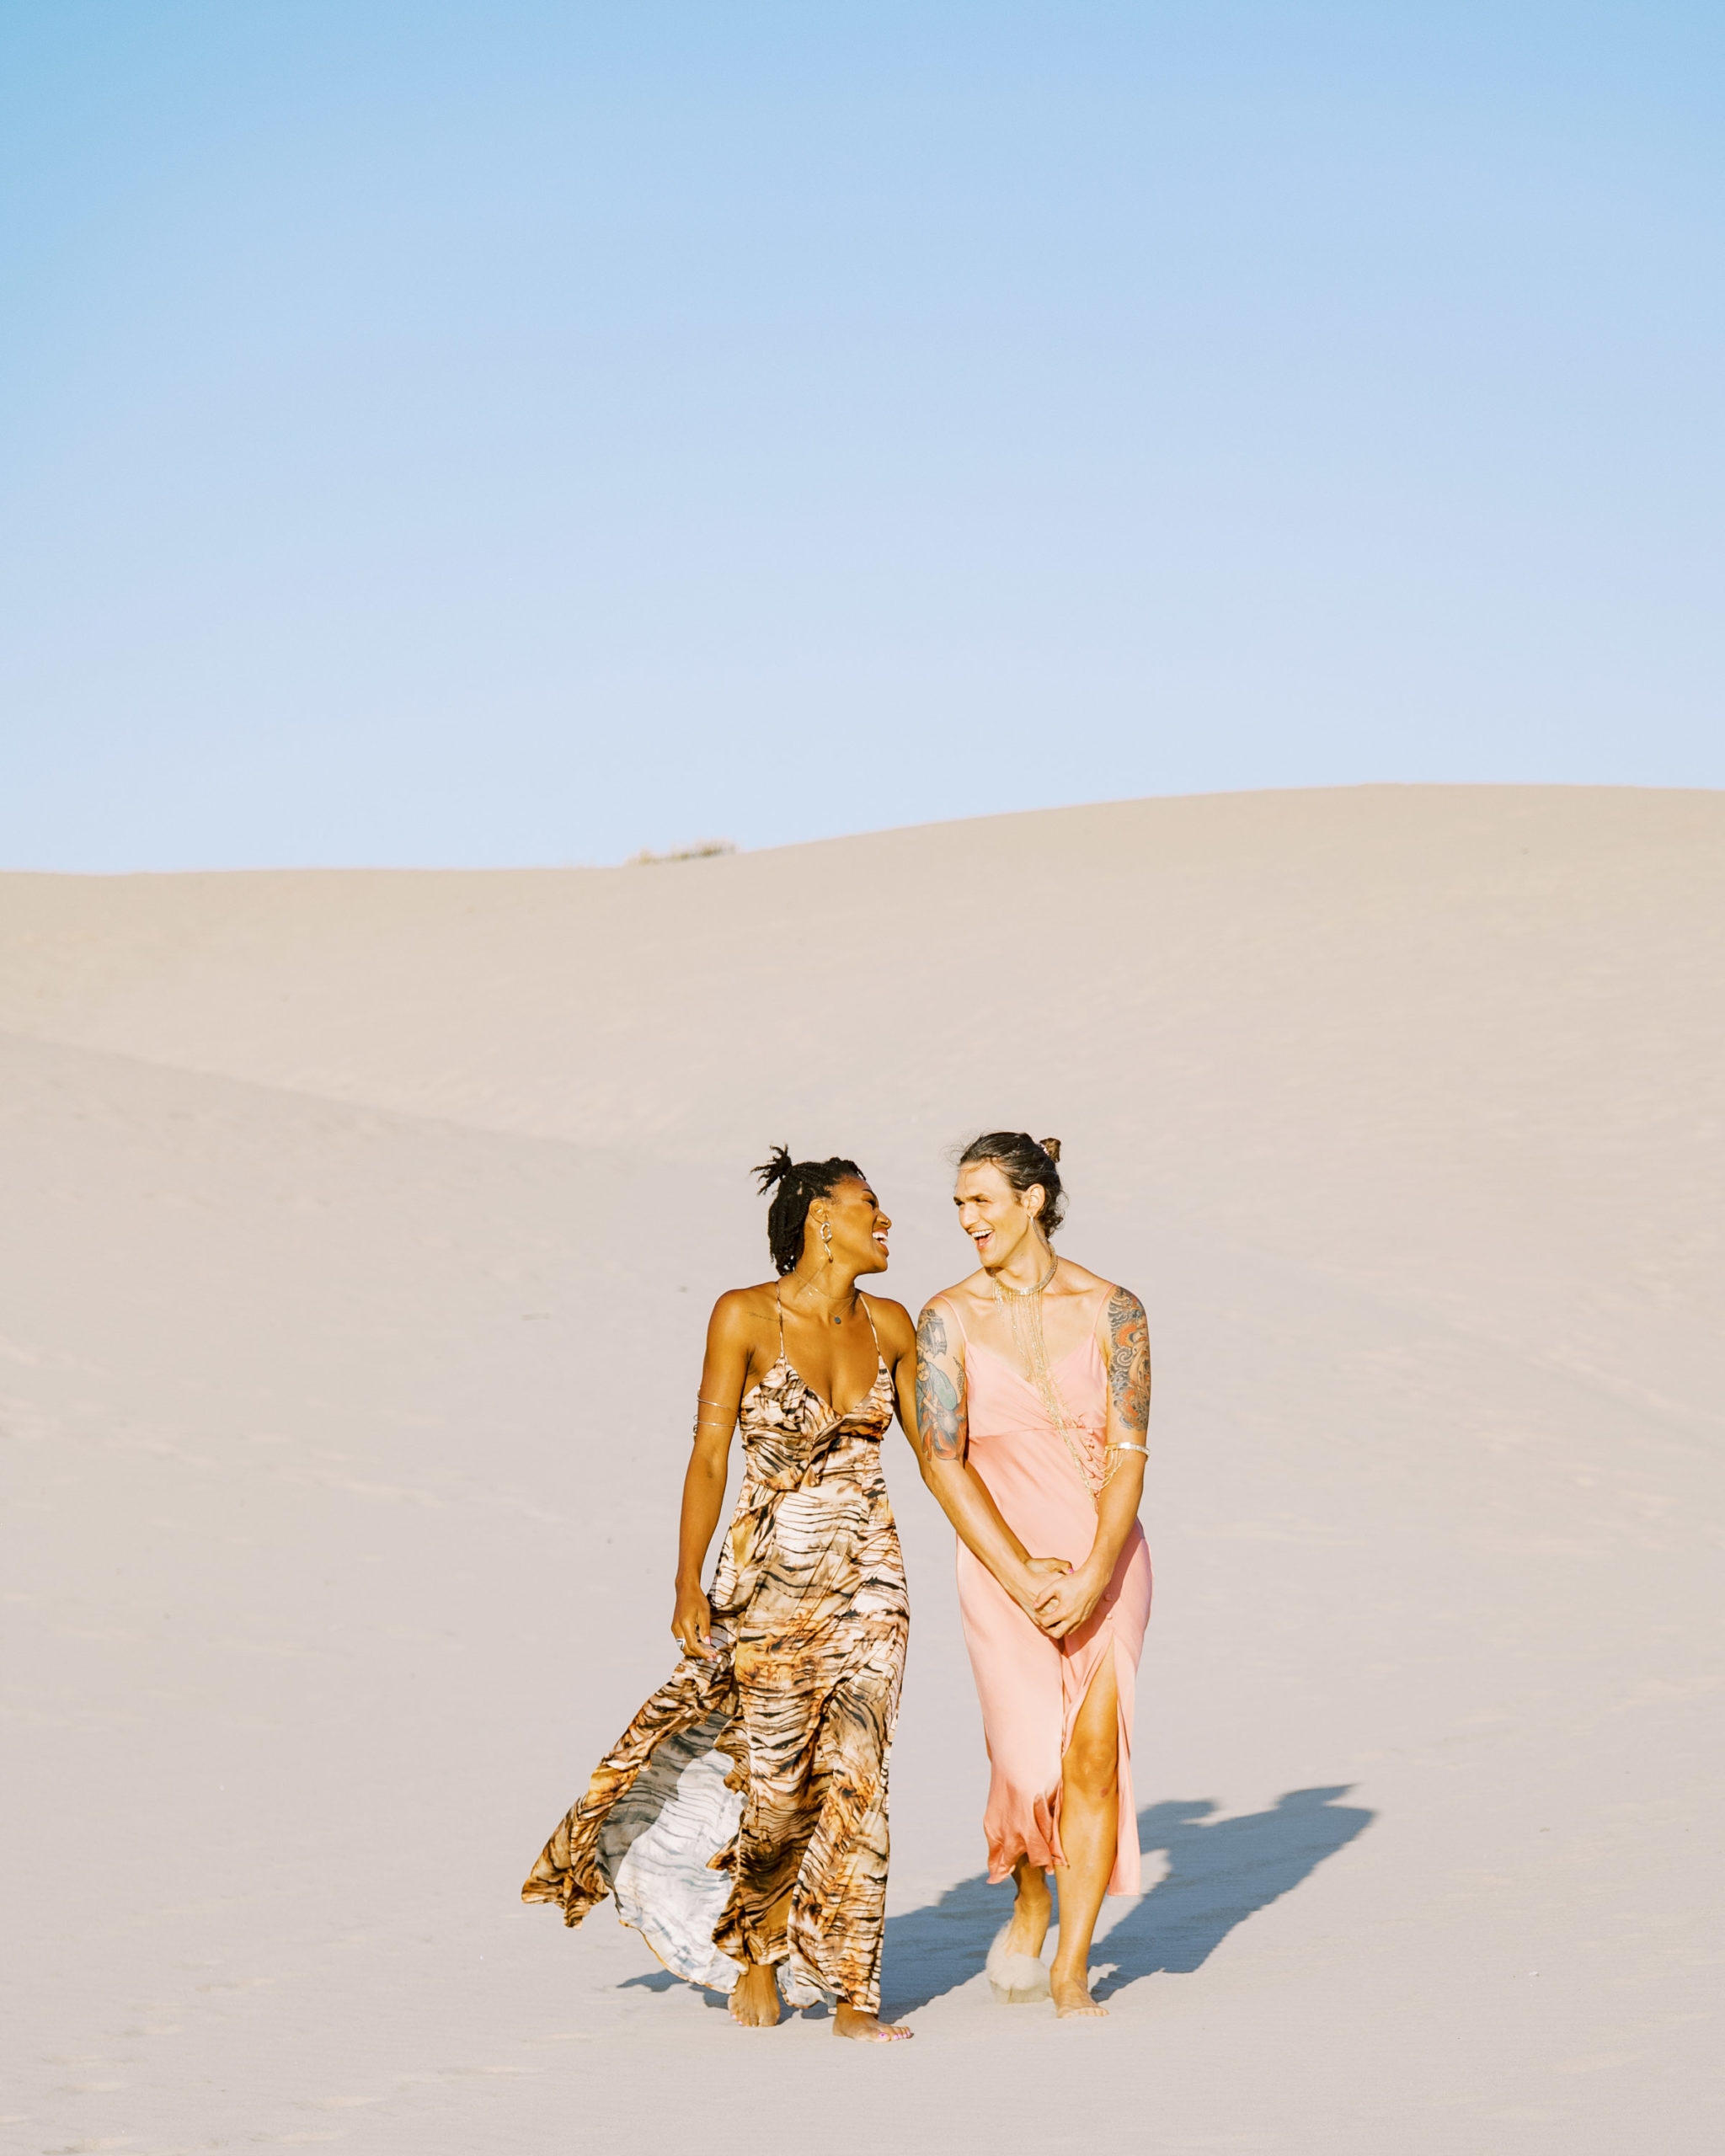 Two women holding hands and walking in the sand